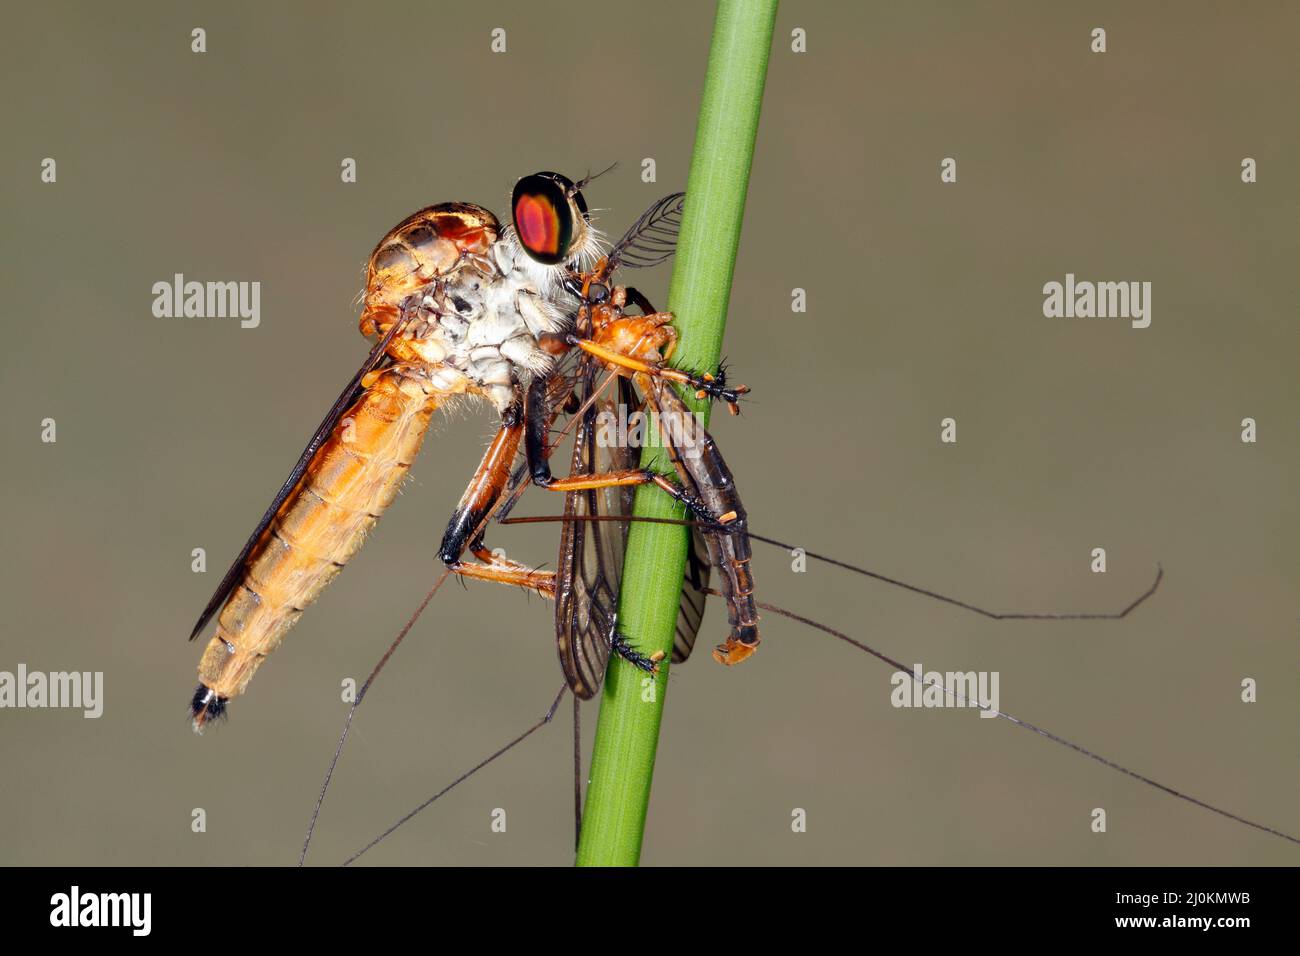 Robber Fly, Family Asilidae. Species unknown as most Robber Flies in this family look similar and difficult to accurately identify from a photograph. Stock Photo